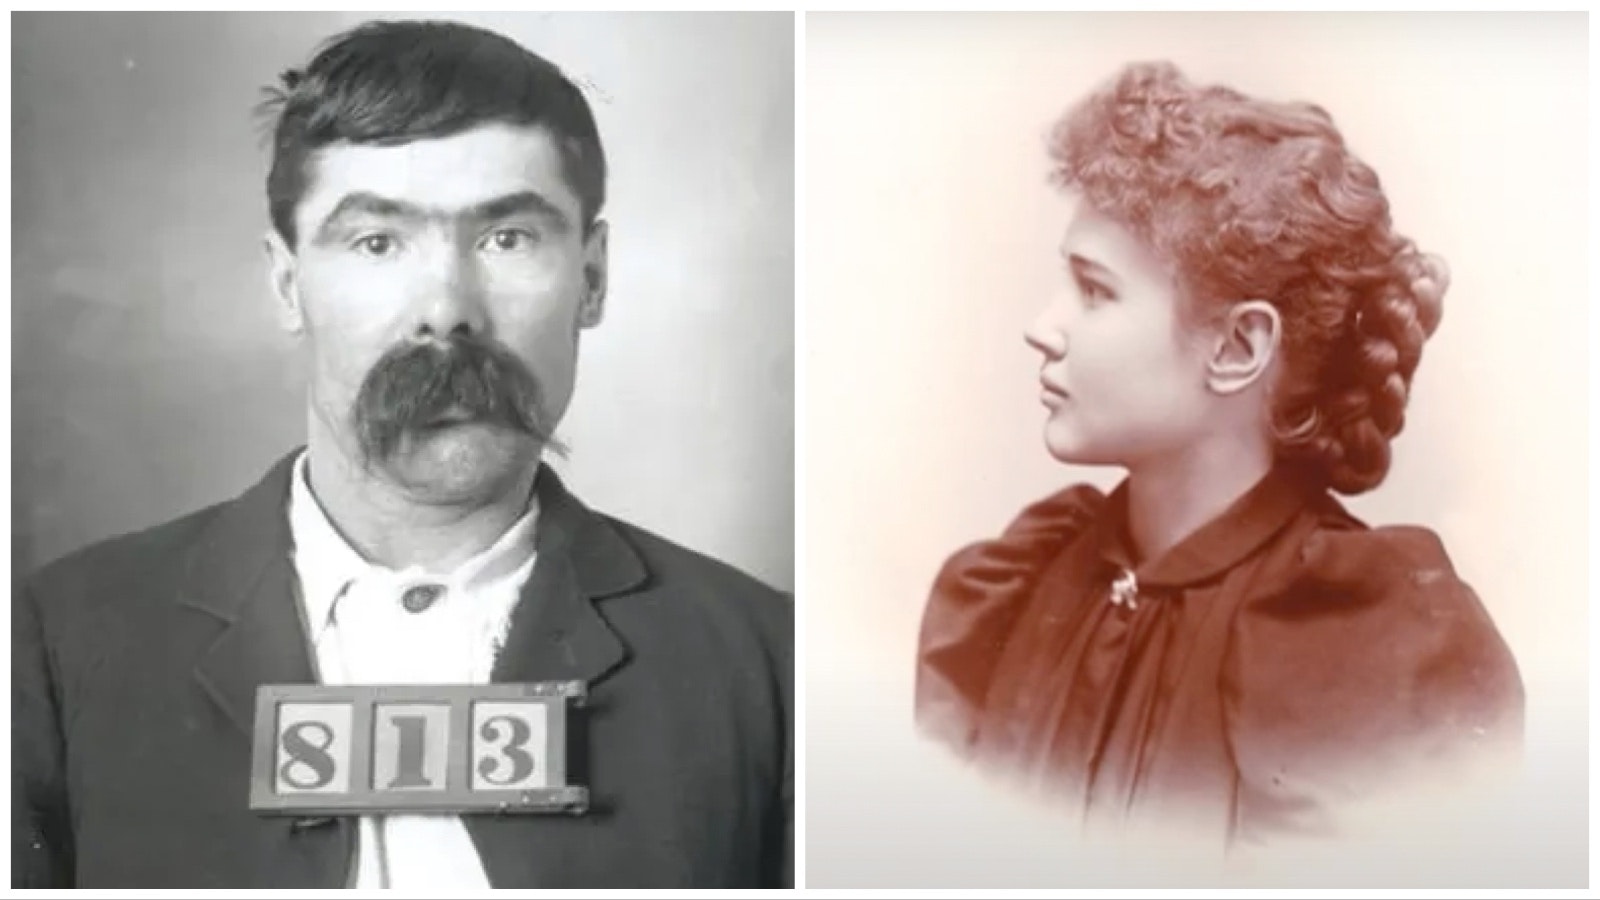 Notorious outlaws Tom O'Day and Minnie Brown when she was 18. The young, pretty girl liked to flirt and had many lady friends too, but her life is something of a mystery. She died a pauper.